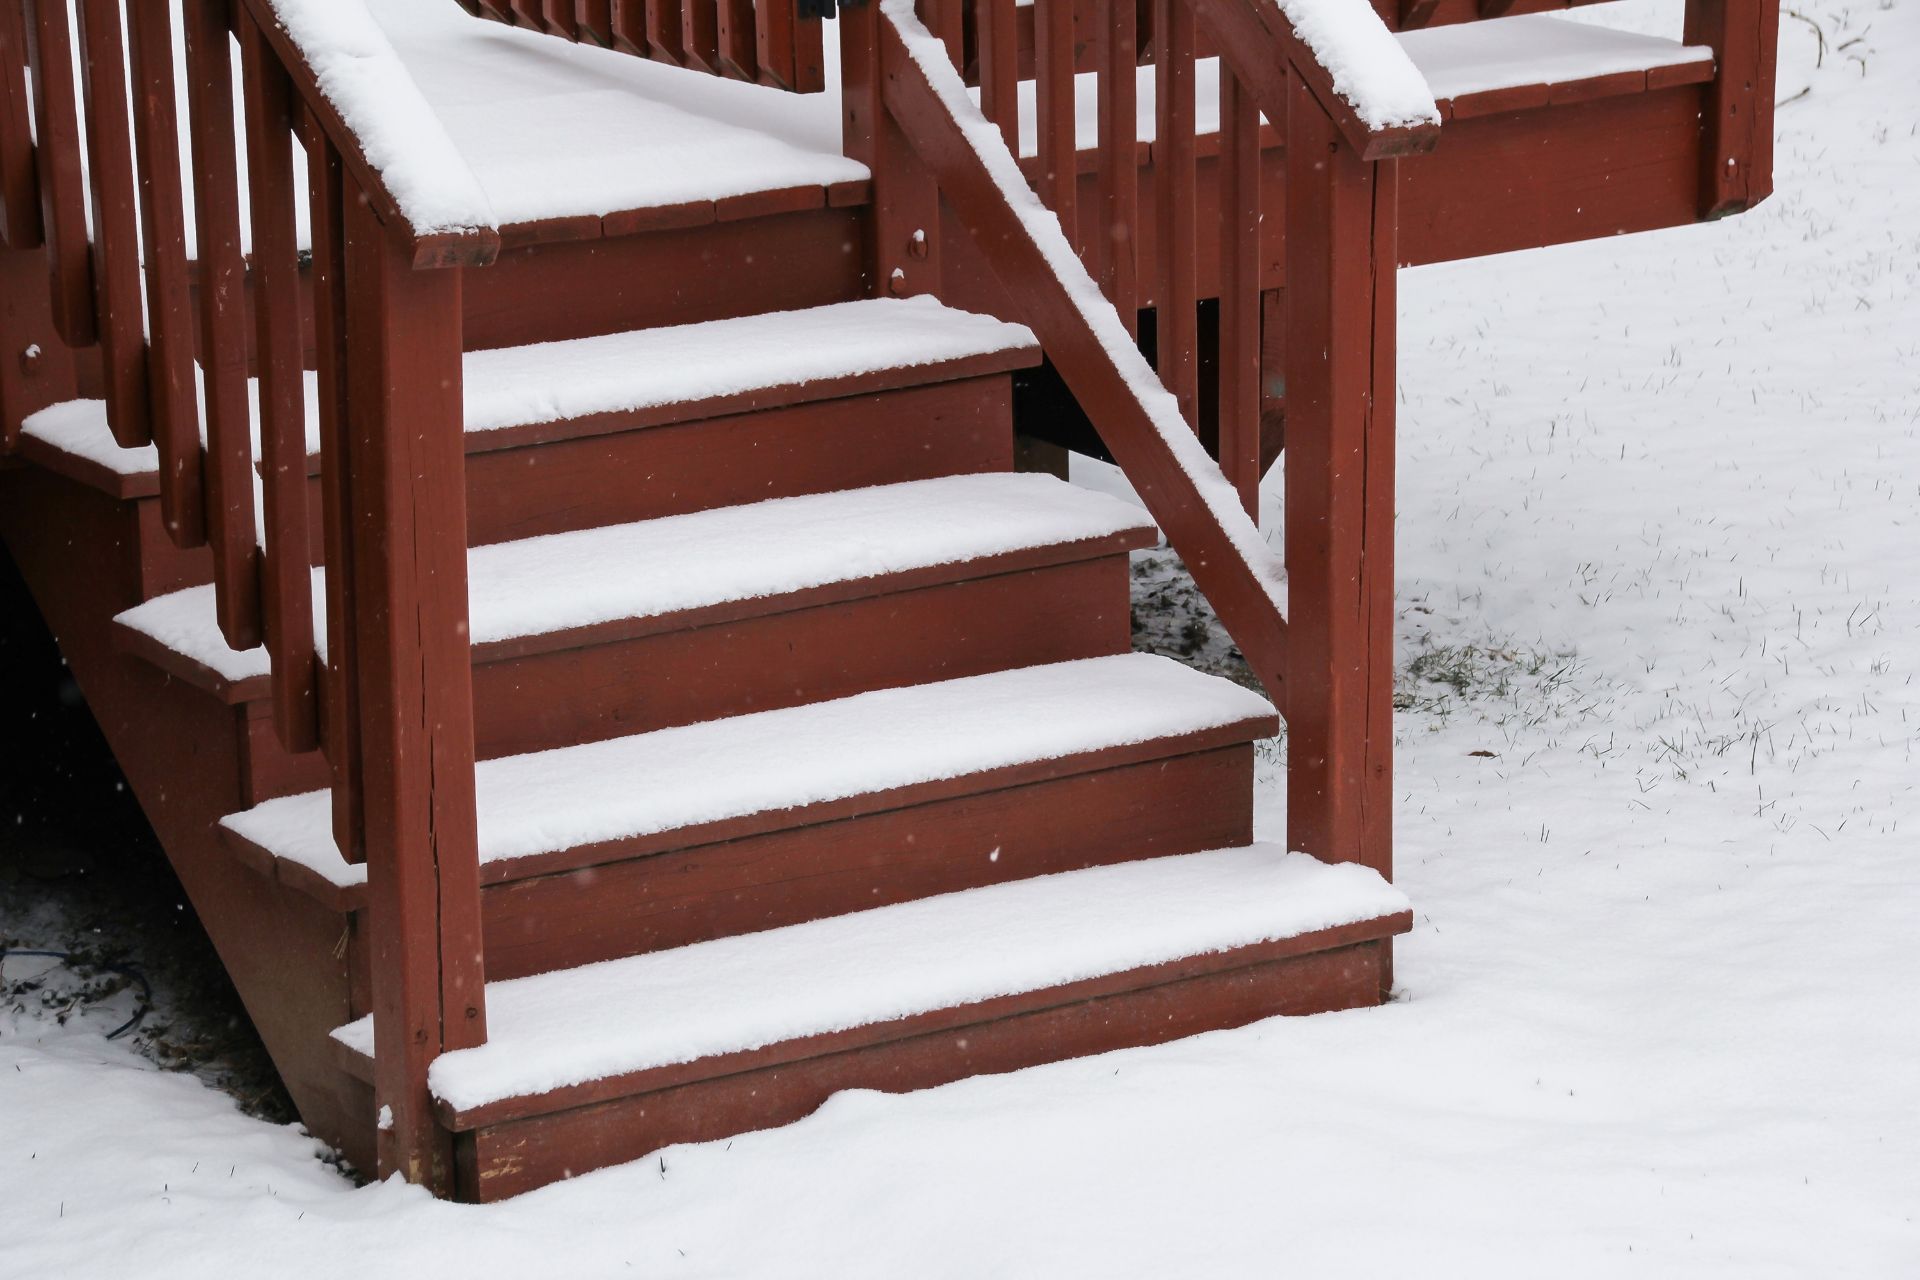 Snow-covered wooden stairs lead down from a deck, with each step accumulating a pristine layer of snow in St. Paul, Minnesota. The contrasting dark brown paint of the wood and the white snow create a peaceful winter scene. The deck's railing is also dusted with snow, and snowflakes are scattered across the surrounding ground, indicating a recent snowfall.